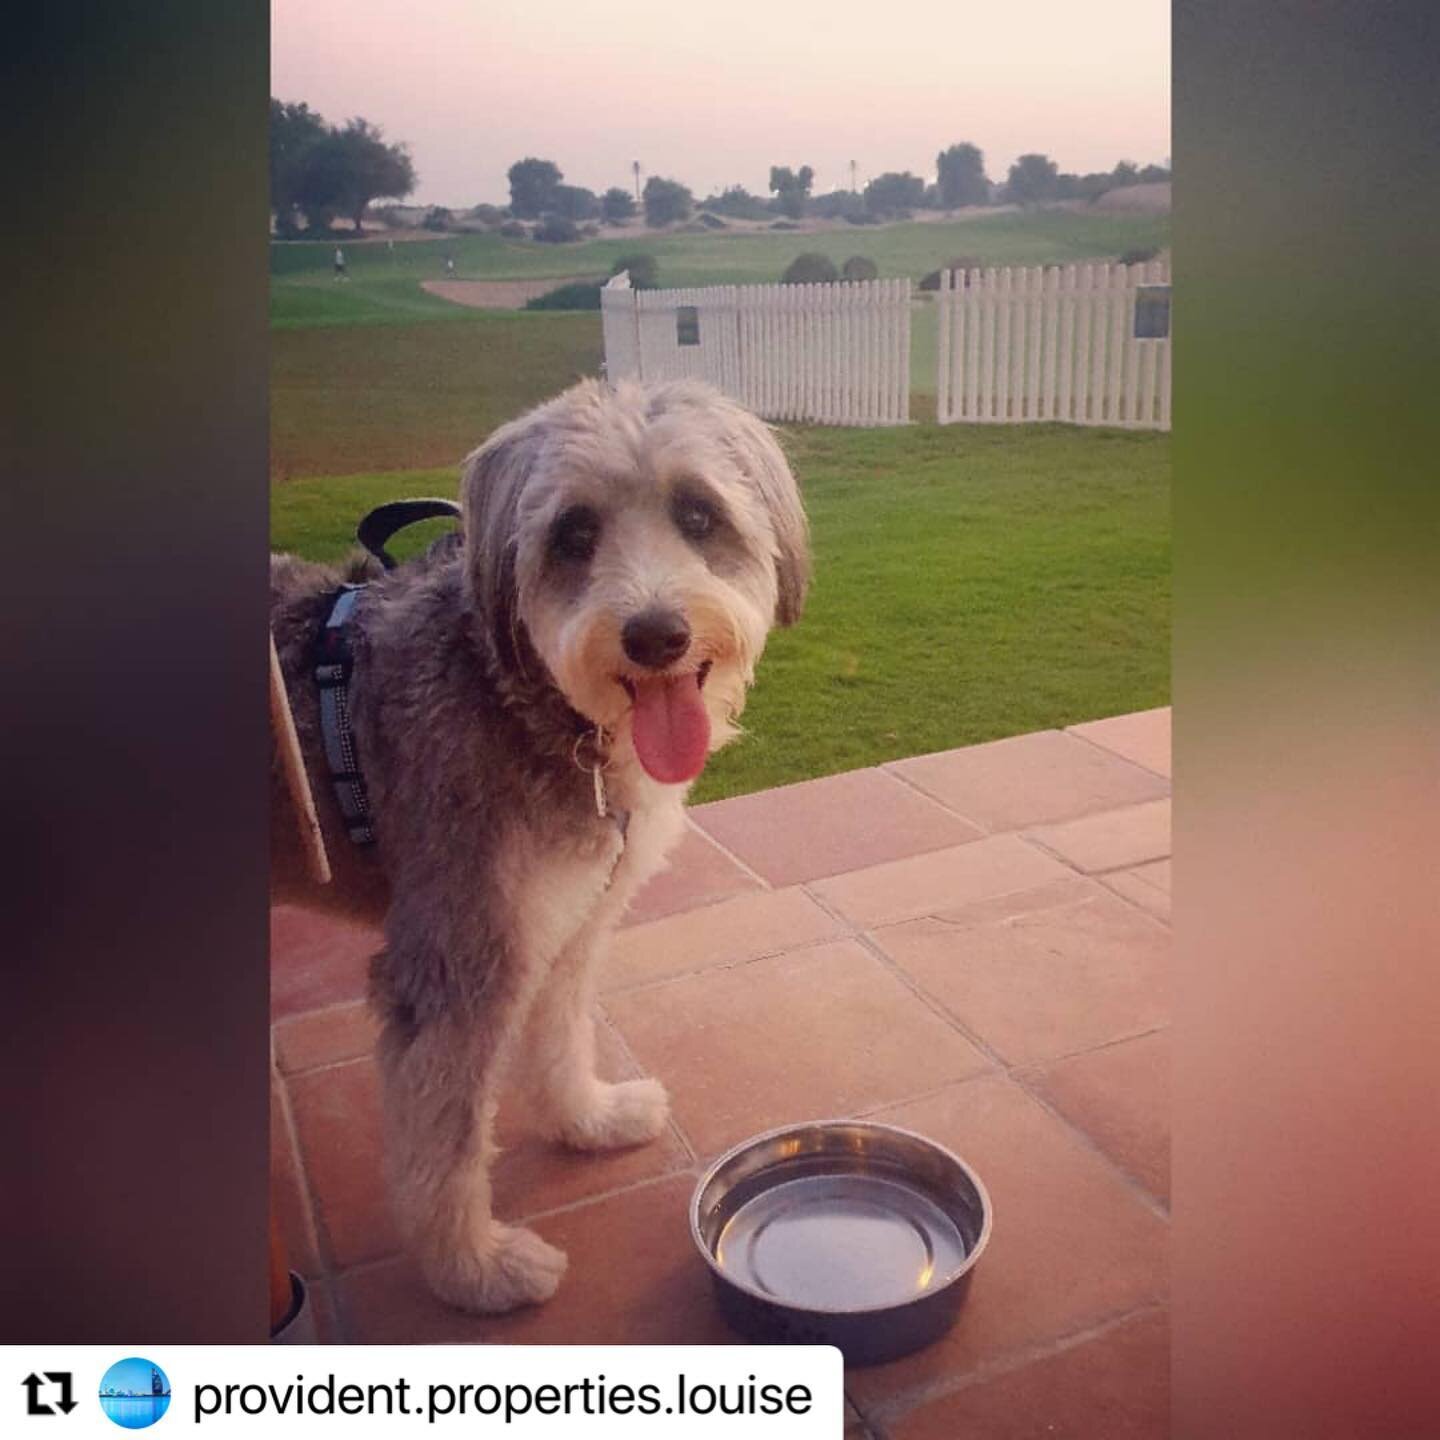 #Repost @provident.properties.louise with @make_repost
・・・
Lovely evening walk finishing at the @the_els_club_dubai
Great food and welcome thanks to @myanimaliaclub whilst looking after the gorgeous Buddy with @dxbdogsit

#dxbdogsit #animalia #myduba